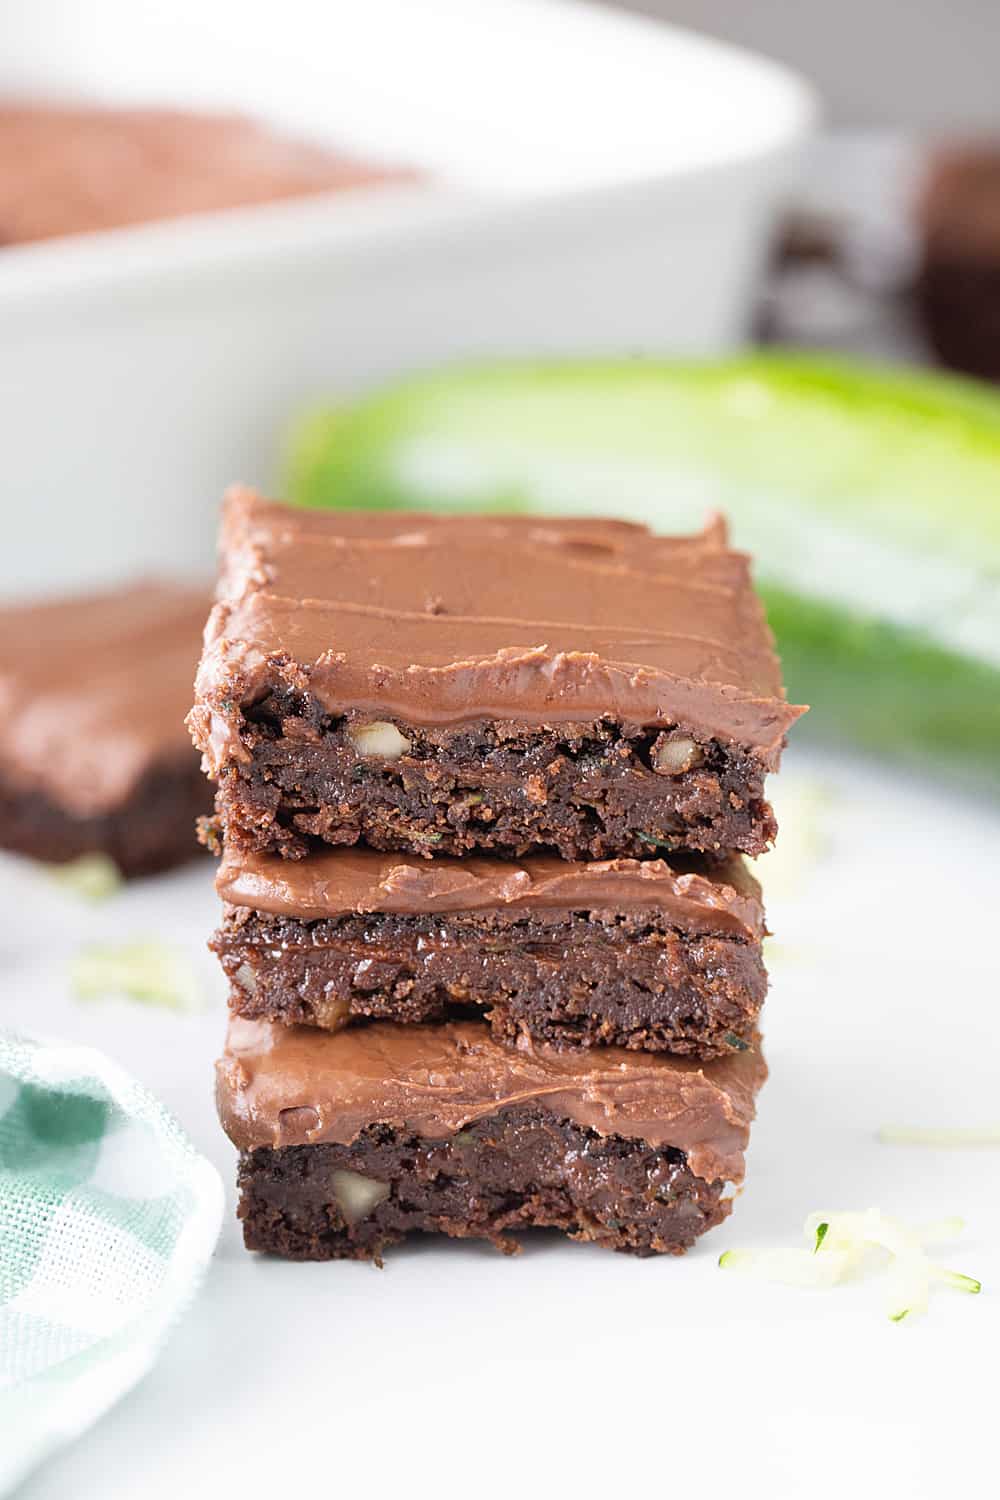 Frosted Zucchini Brownies - Frosted zucchini brownies feature a decadent chocolate flavor and rich, creamy frosting. And guess what? You can't taste zucchini in this brownie recipe! #halfscratched #brownies #brownie #recipe #baking #chocolate #zucchini #dessert #sweets